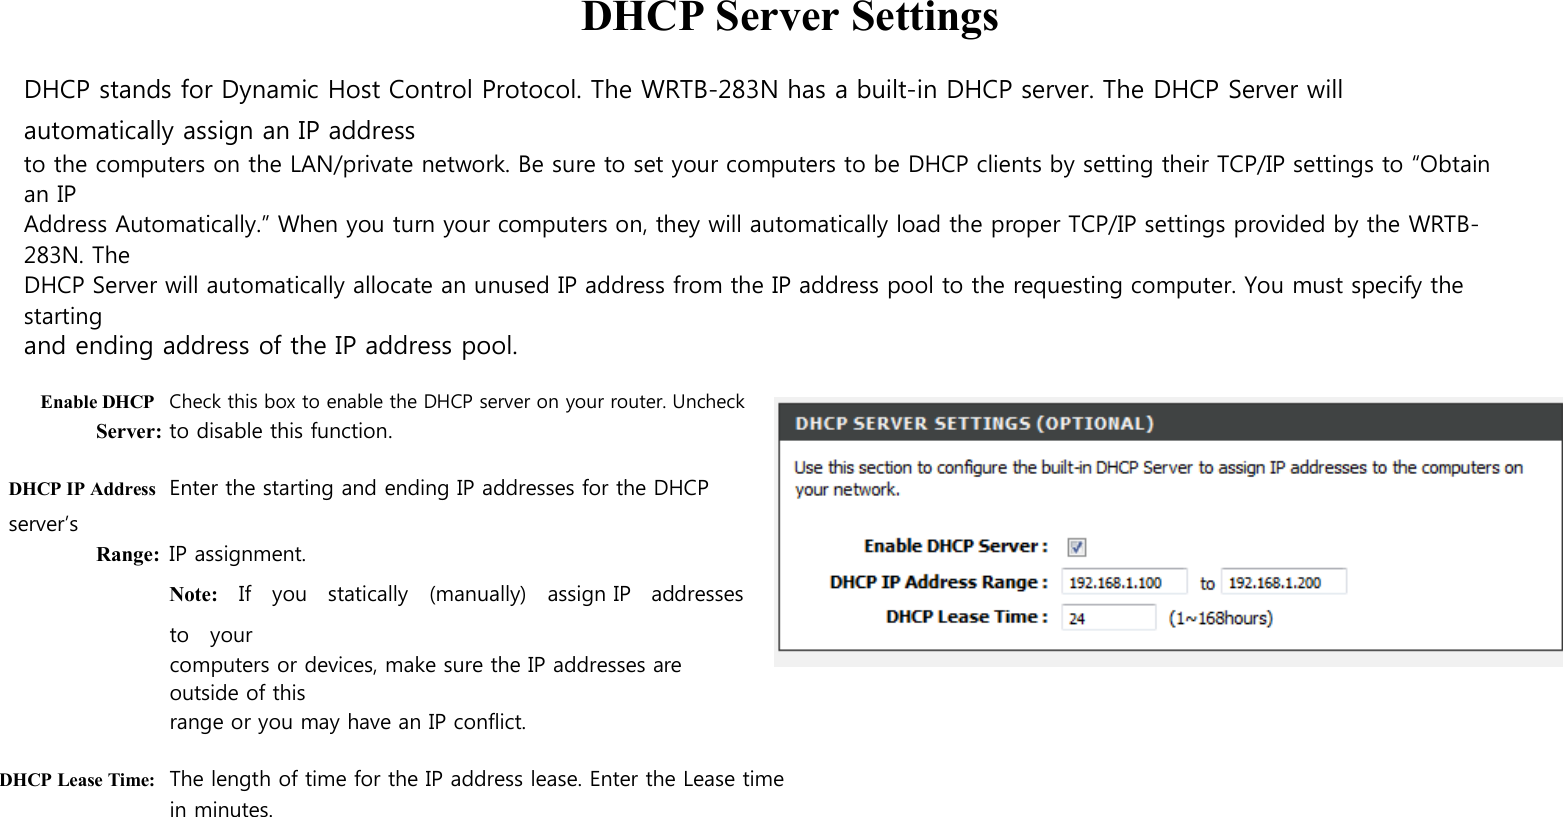  DHCP Server Settings  DHCP stands for Dynamic Host Control Protocol. The WRTB-283N has a built-in DHCP server. The DHCP Server will automatically assign an IP address to the computers on the LAN/private network. Be sure to set your computers to be DHCP clients by setting their TCP/IP settings to “Obtain an IP Address Automatically.” When you turn your computers on, they will automatically load the proper TCP/IP settings provided by the WRTB-283N. The DHCP Server will automatically allocate an unused IP address from the IP address pool to the requesting computer. You must specify the starting and ending address of the IP address pool.  Enable DHCP Check this box to enable the DHCP server on your router. Uncheck Server: to disable this function.  DHCP IP Address Enter the starting and ending IP addresses for the DHCP server’s Range: IP assignment. Note:    If    you    statically    (manually)    assign IP   addresses   to    your computers or devices, make sure the IP addresses are outside of this range or you may have an IP conflict.  DHCP Lease Time: The length of time for the IP address lease. Enter the Lease time in minutes.    